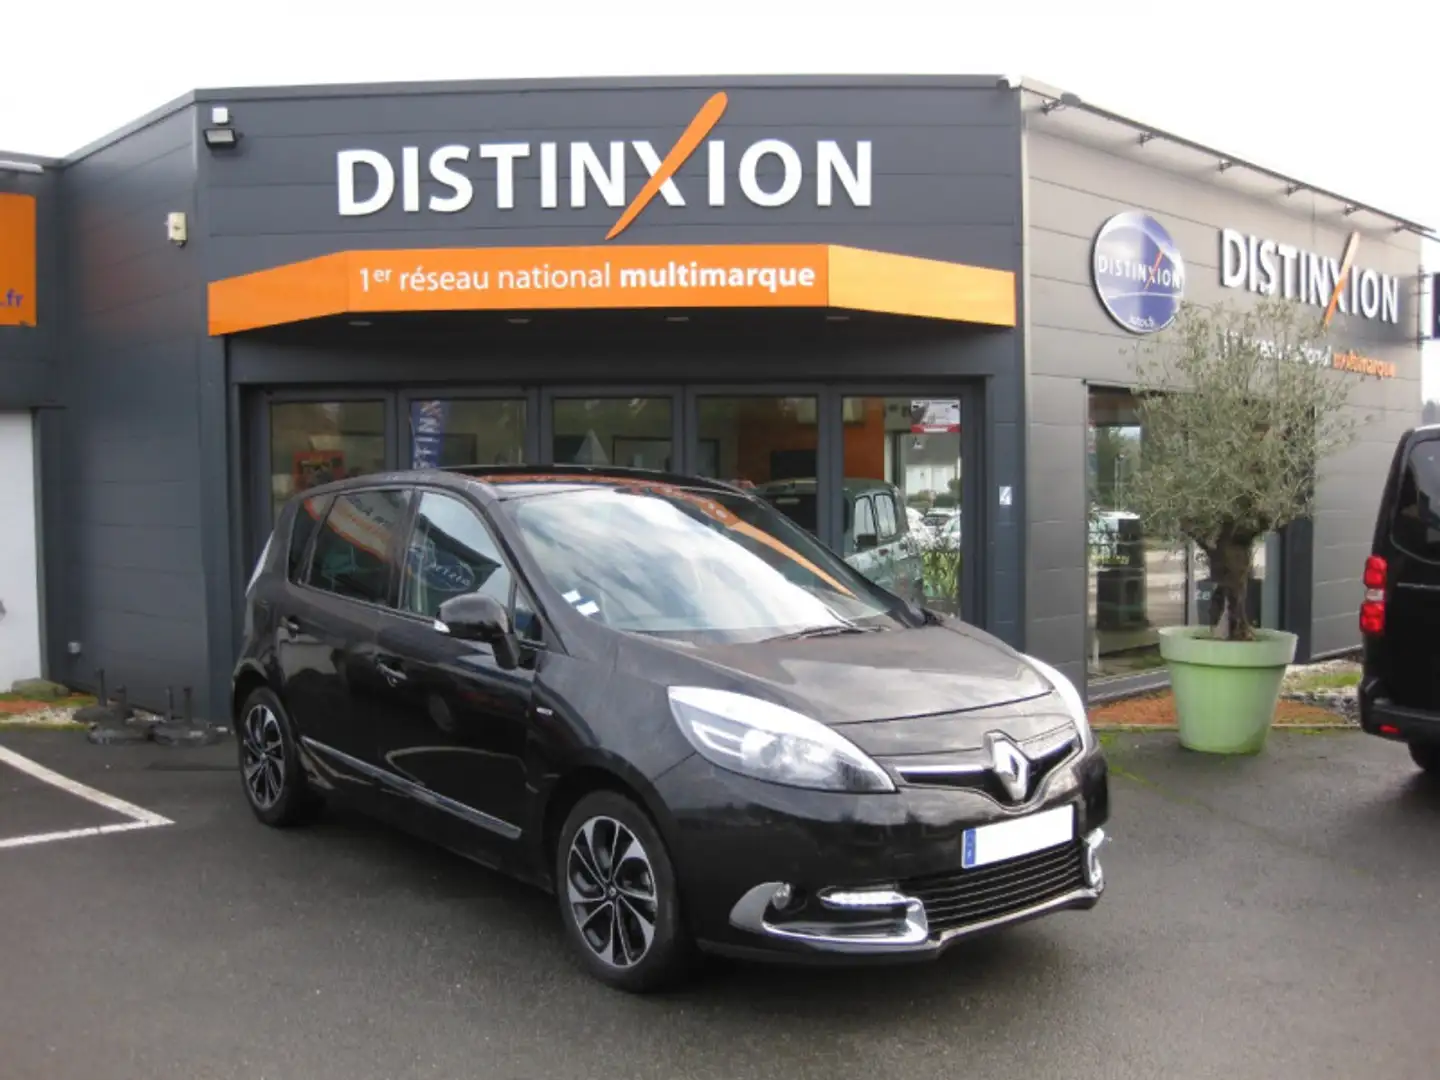 Renault Scenic 1.5 DCI 110CH ENERGY BOSE ECO² EURO6 2015 - 1